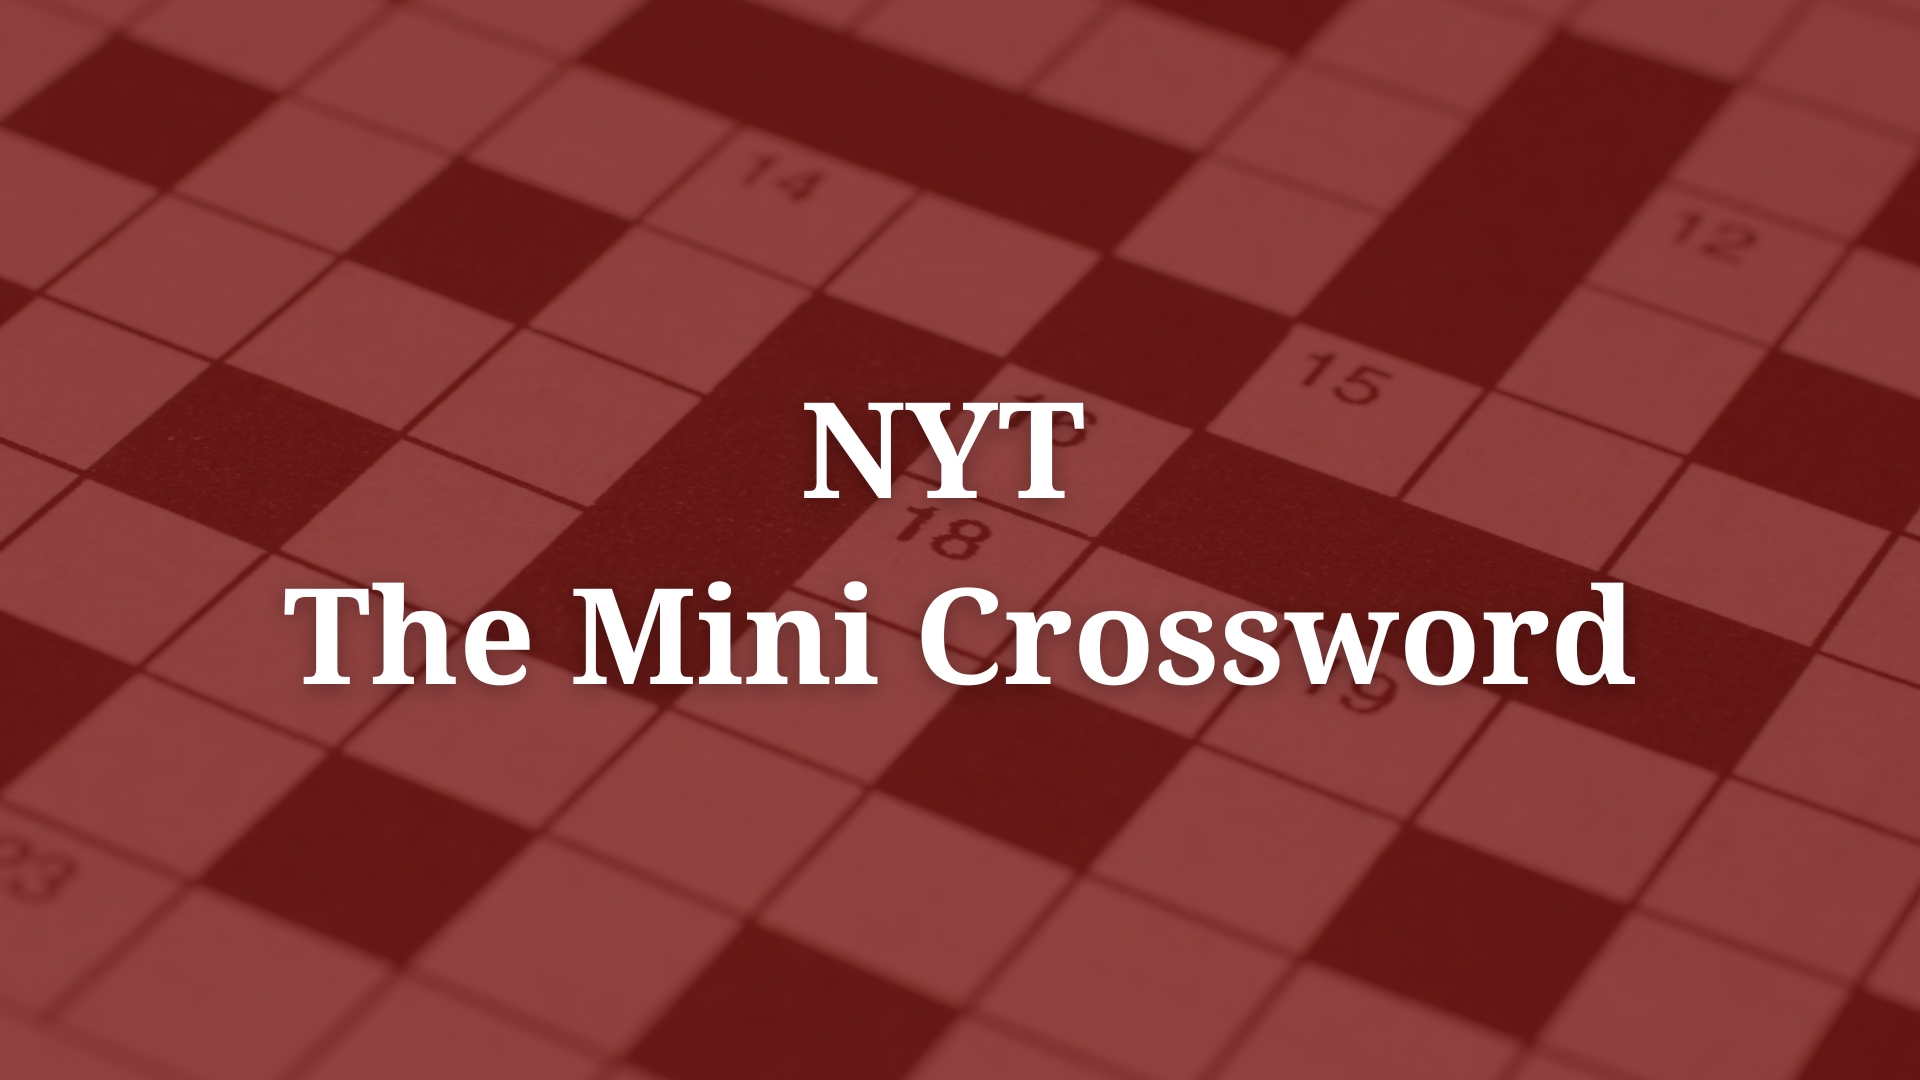 quot Avid enthusiasm quot NYT Mini Crossword Clue Answer and Hints